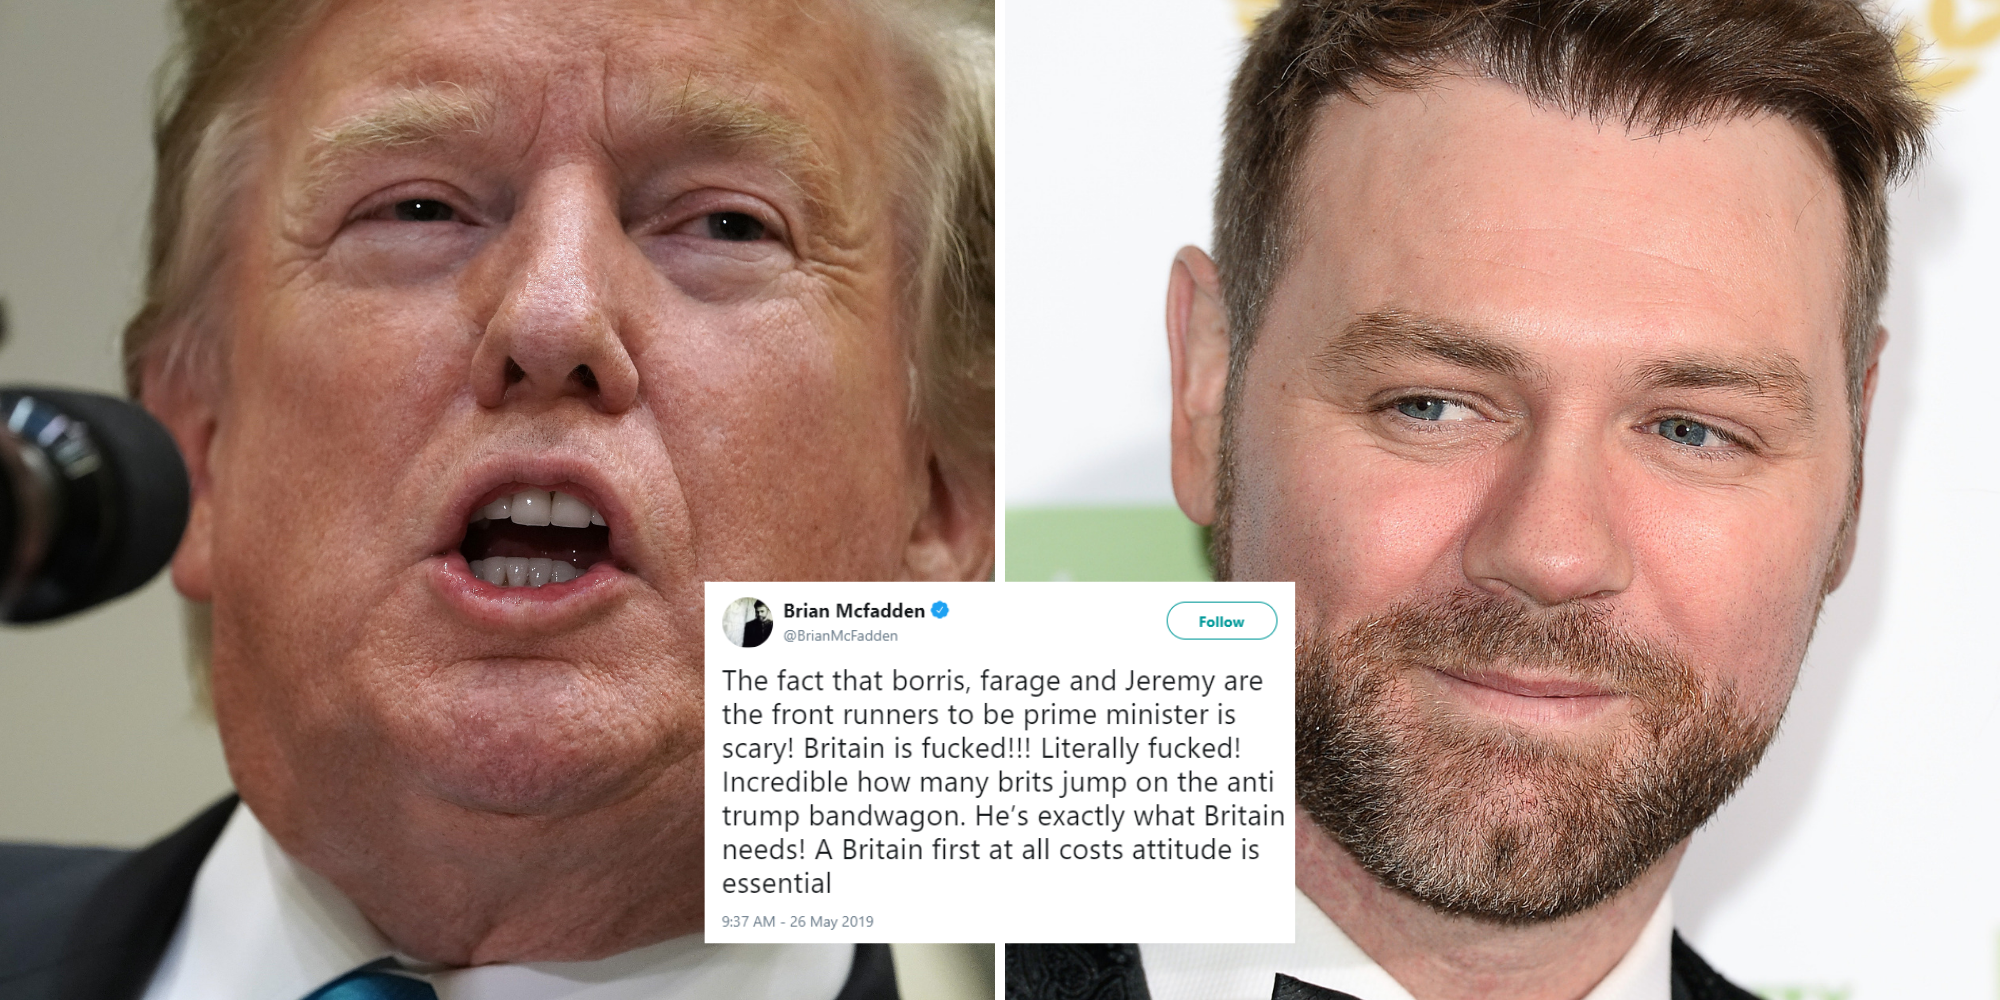 Westlife S Brian Mcfadden Says Trump Is Exactly What Britain Needs He Doesn T Stop There Indy100 Indy100